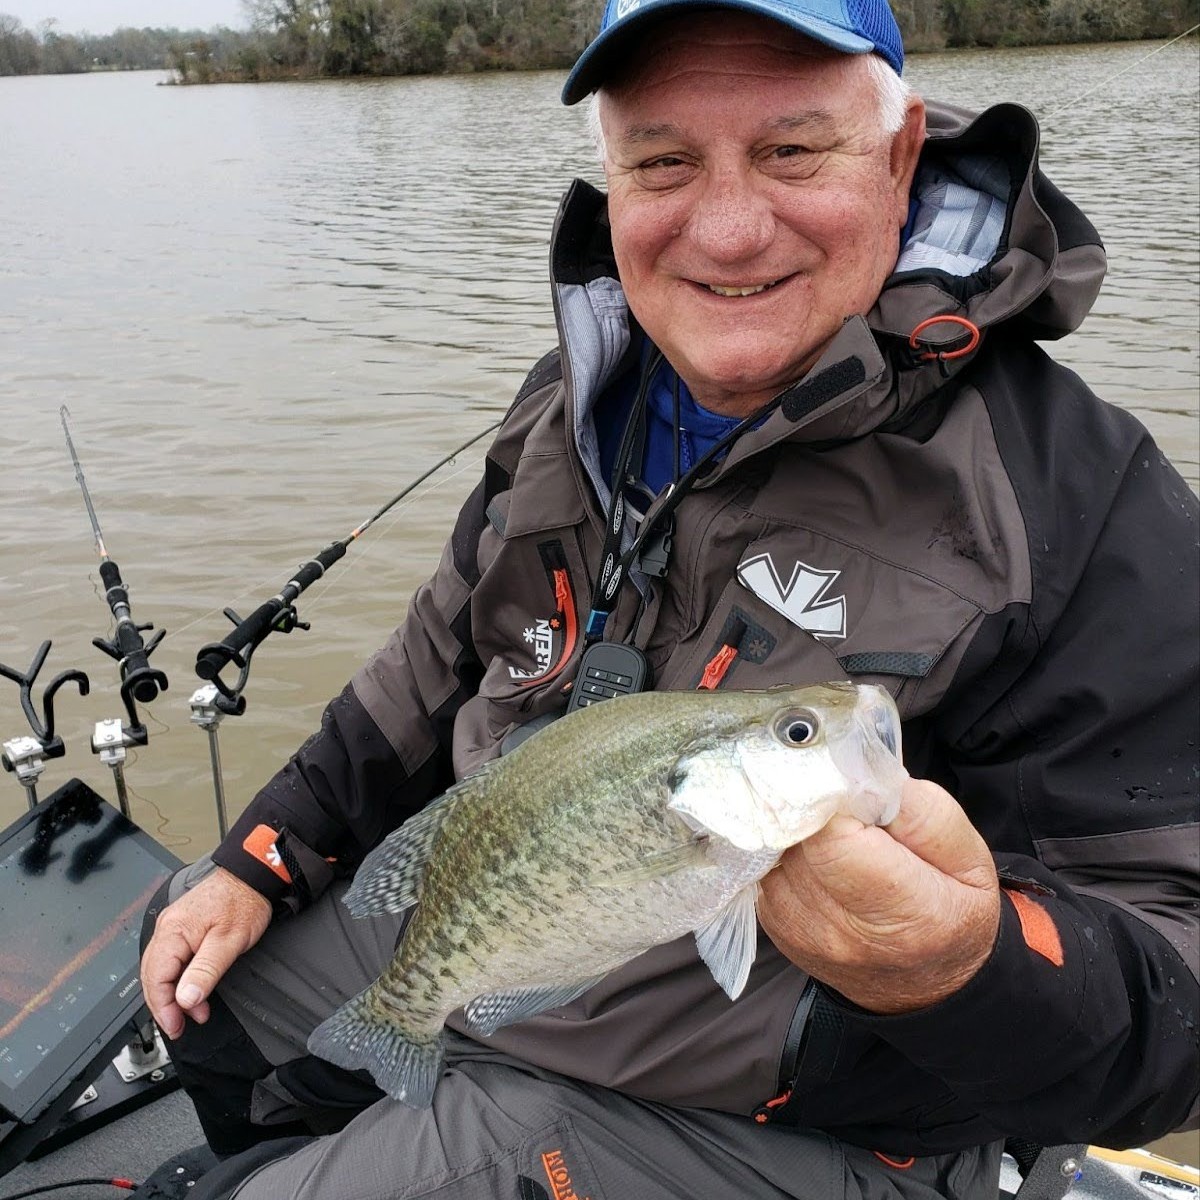 Navigating those pesky April showers can be tough, especially when trying to keep yourself dry. @crappiedan says his @norfinUSA jacket keeps him comfortable and focused on the hunt for crappie.

norfin.info/product/norfin…

#NorfinUSA #Norfin #Jacket #Fishing #FishingGear